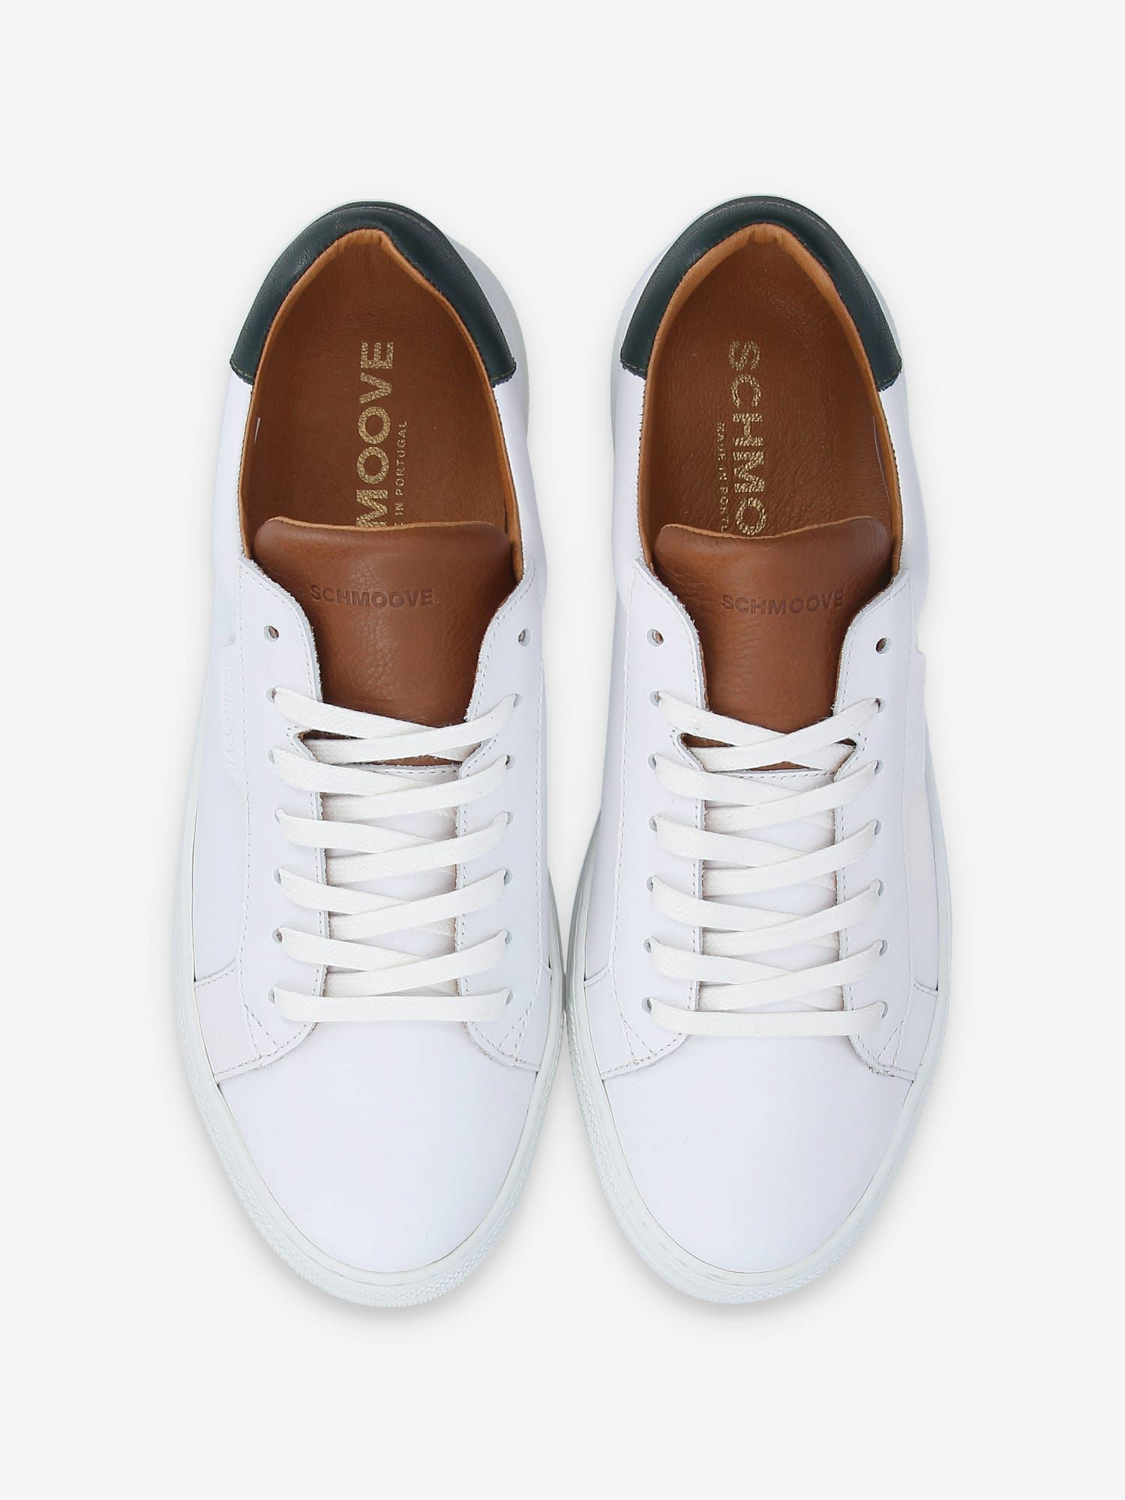 Schmoove Spark Clay, Sneakers Homme, Schmoove